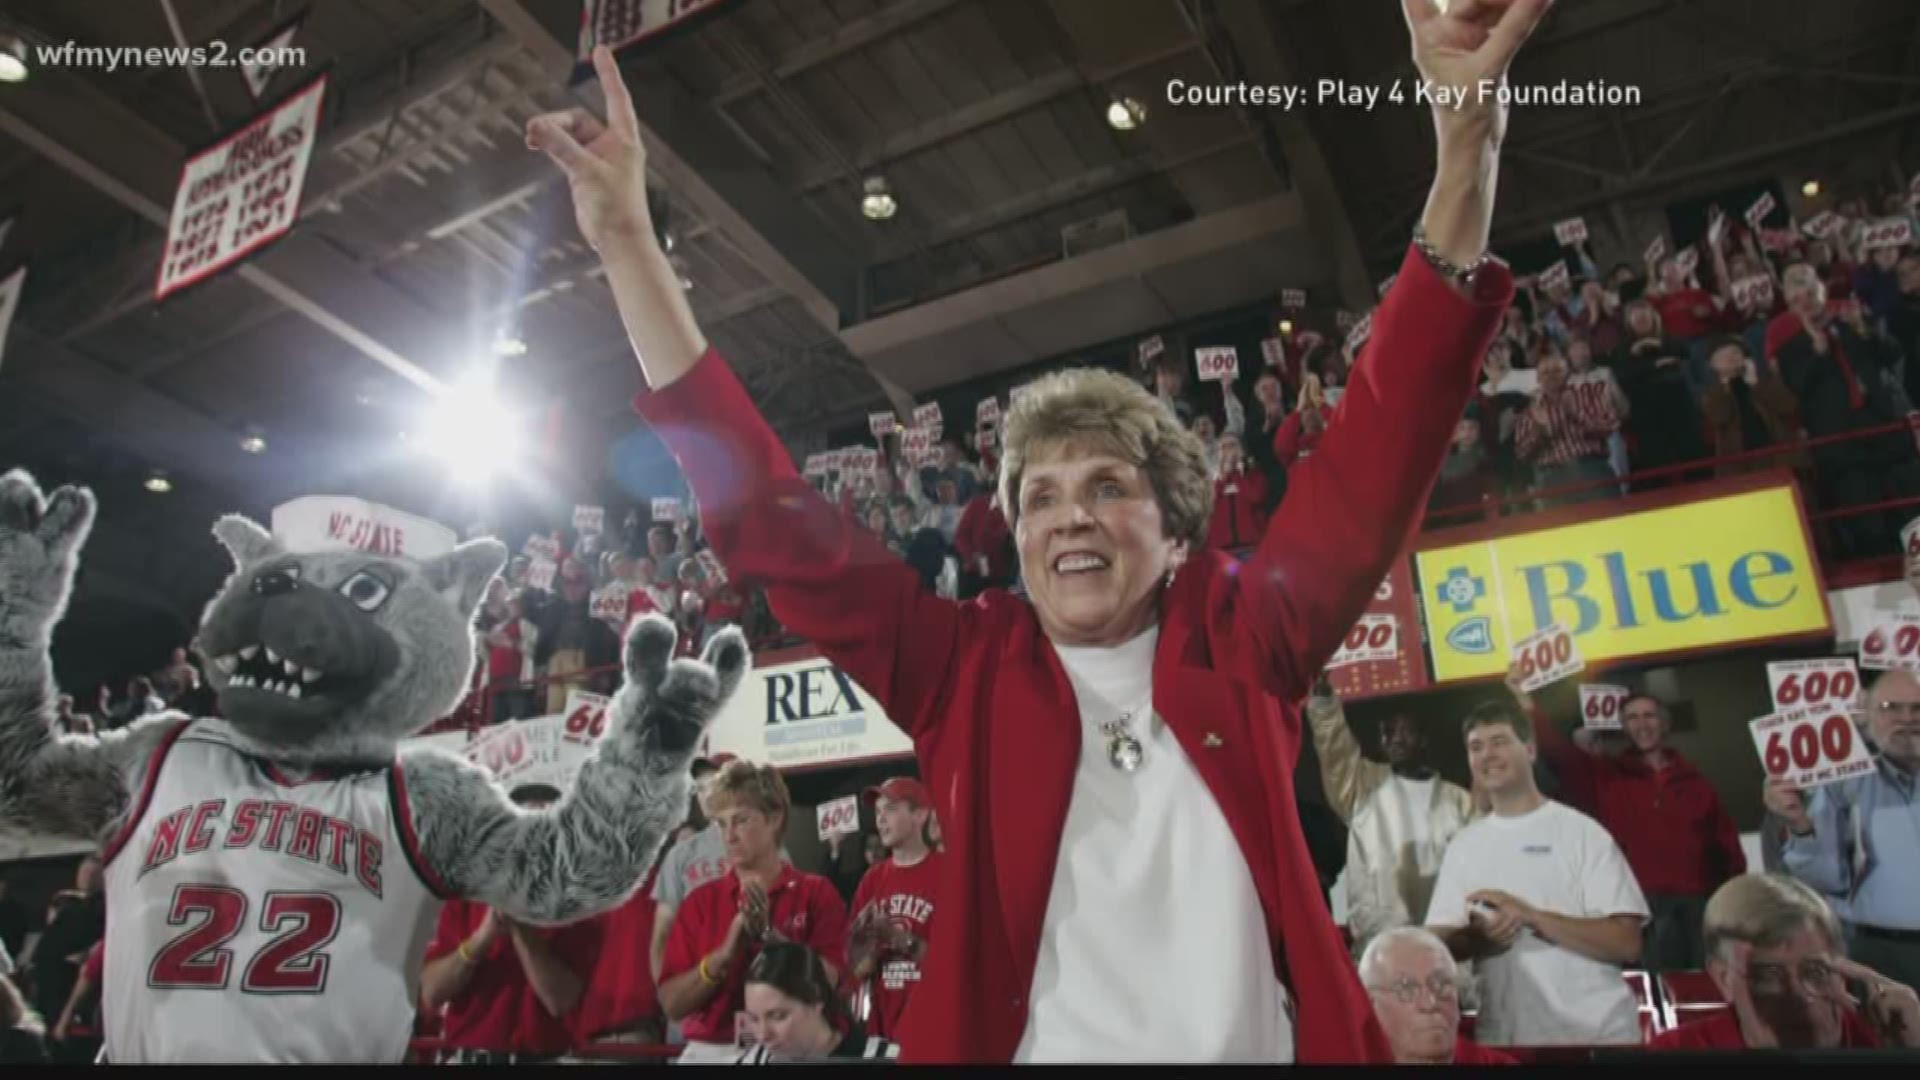 Kay Yow was the NC State Women’s Basketball coach for 34 years and her foundation continues to raise money for Cancer Research.